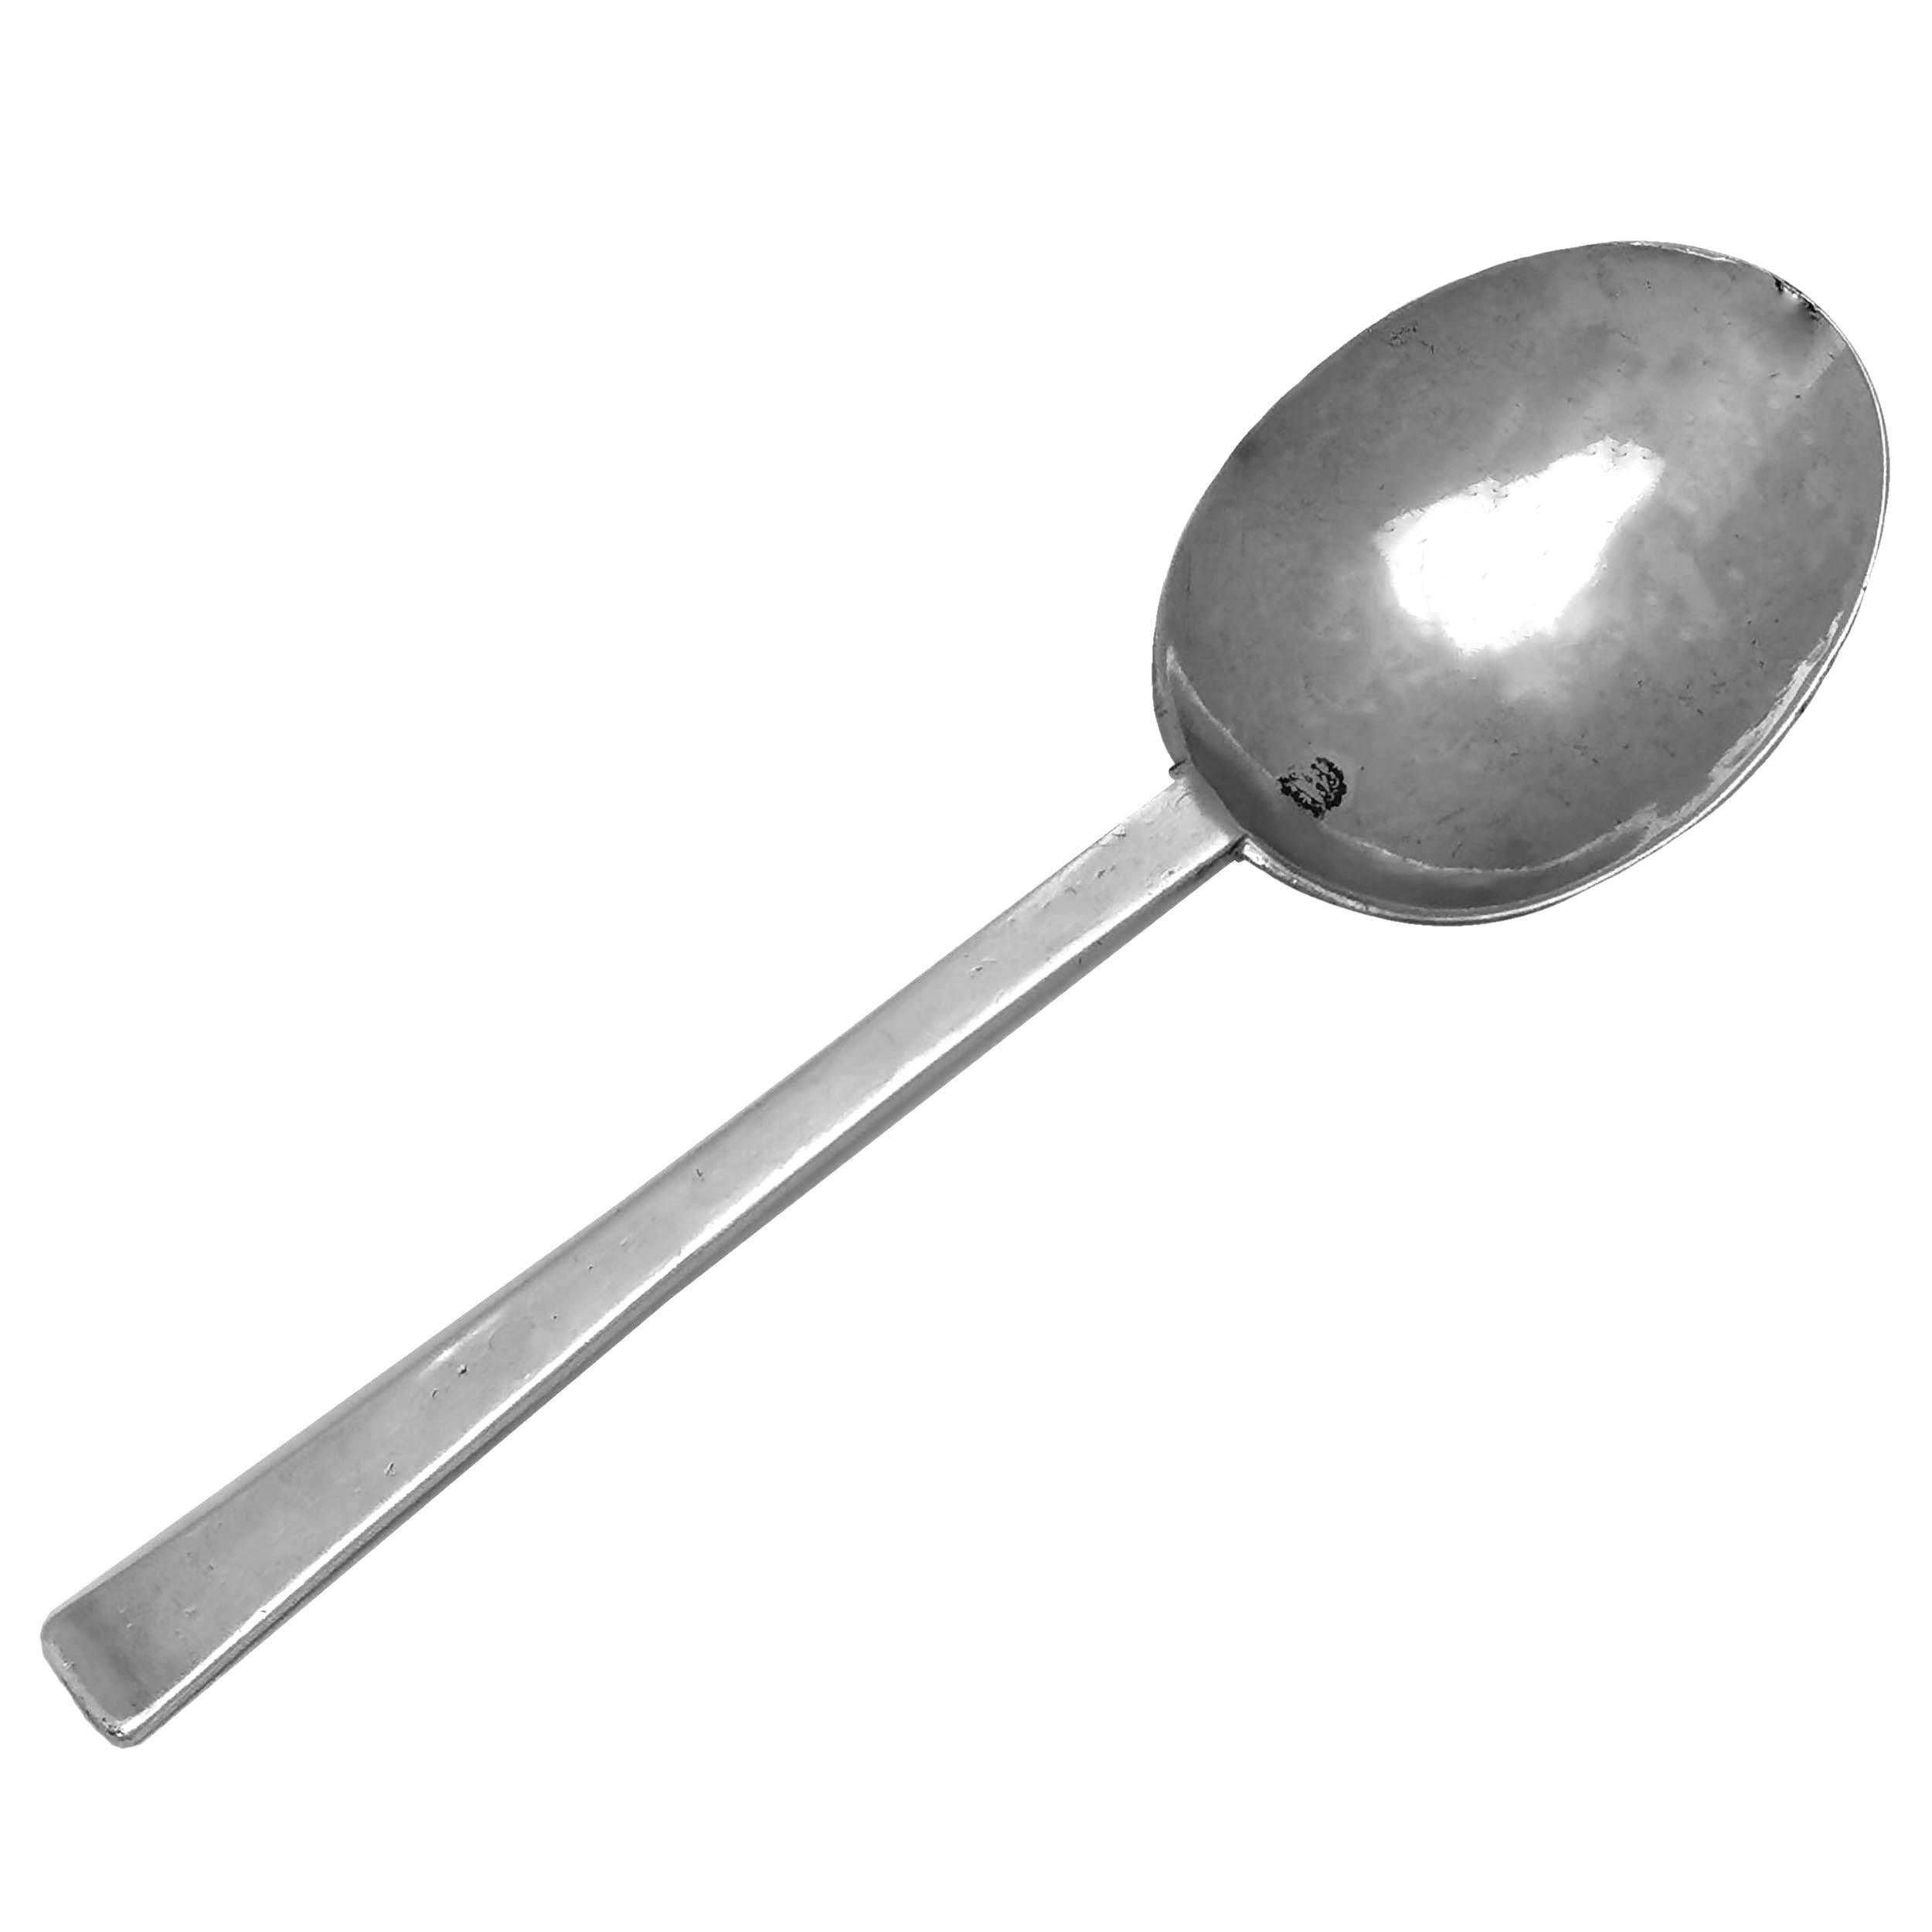 An excellent traditional Charles II Solid Silver Spoon in the simple, elegant puritan style. The Spoon has the initials SG engraved on the back of the handle.

Made in London, England in 1669 by Stephan Venables.

Approx. Weight - 52g
Approx. Length